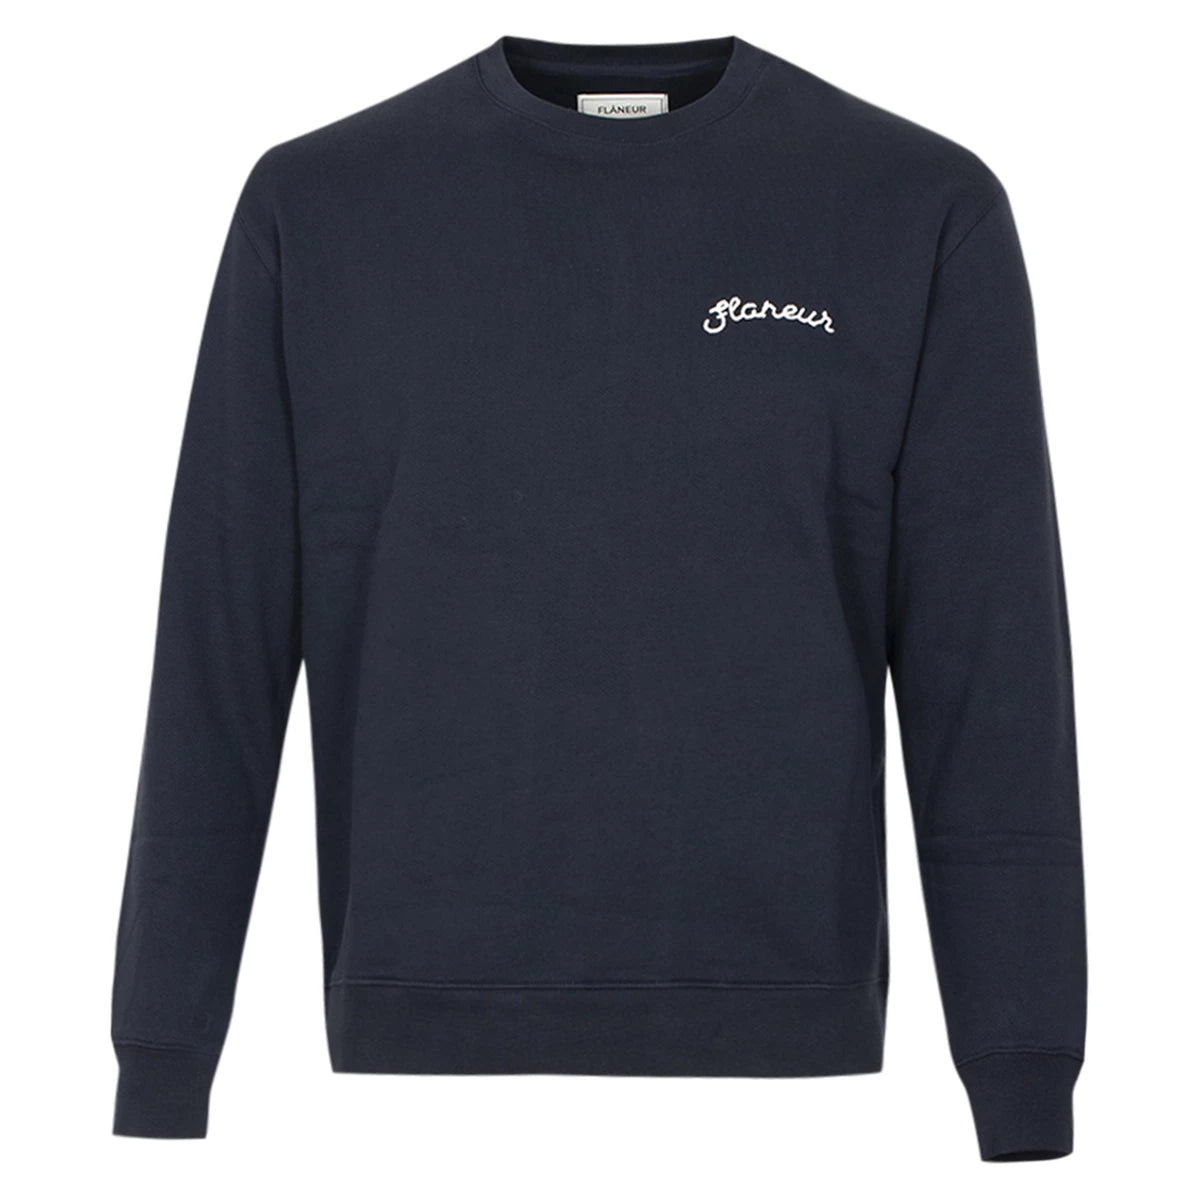 Flaneur Sweater donkerblauw | Sighnature sweater